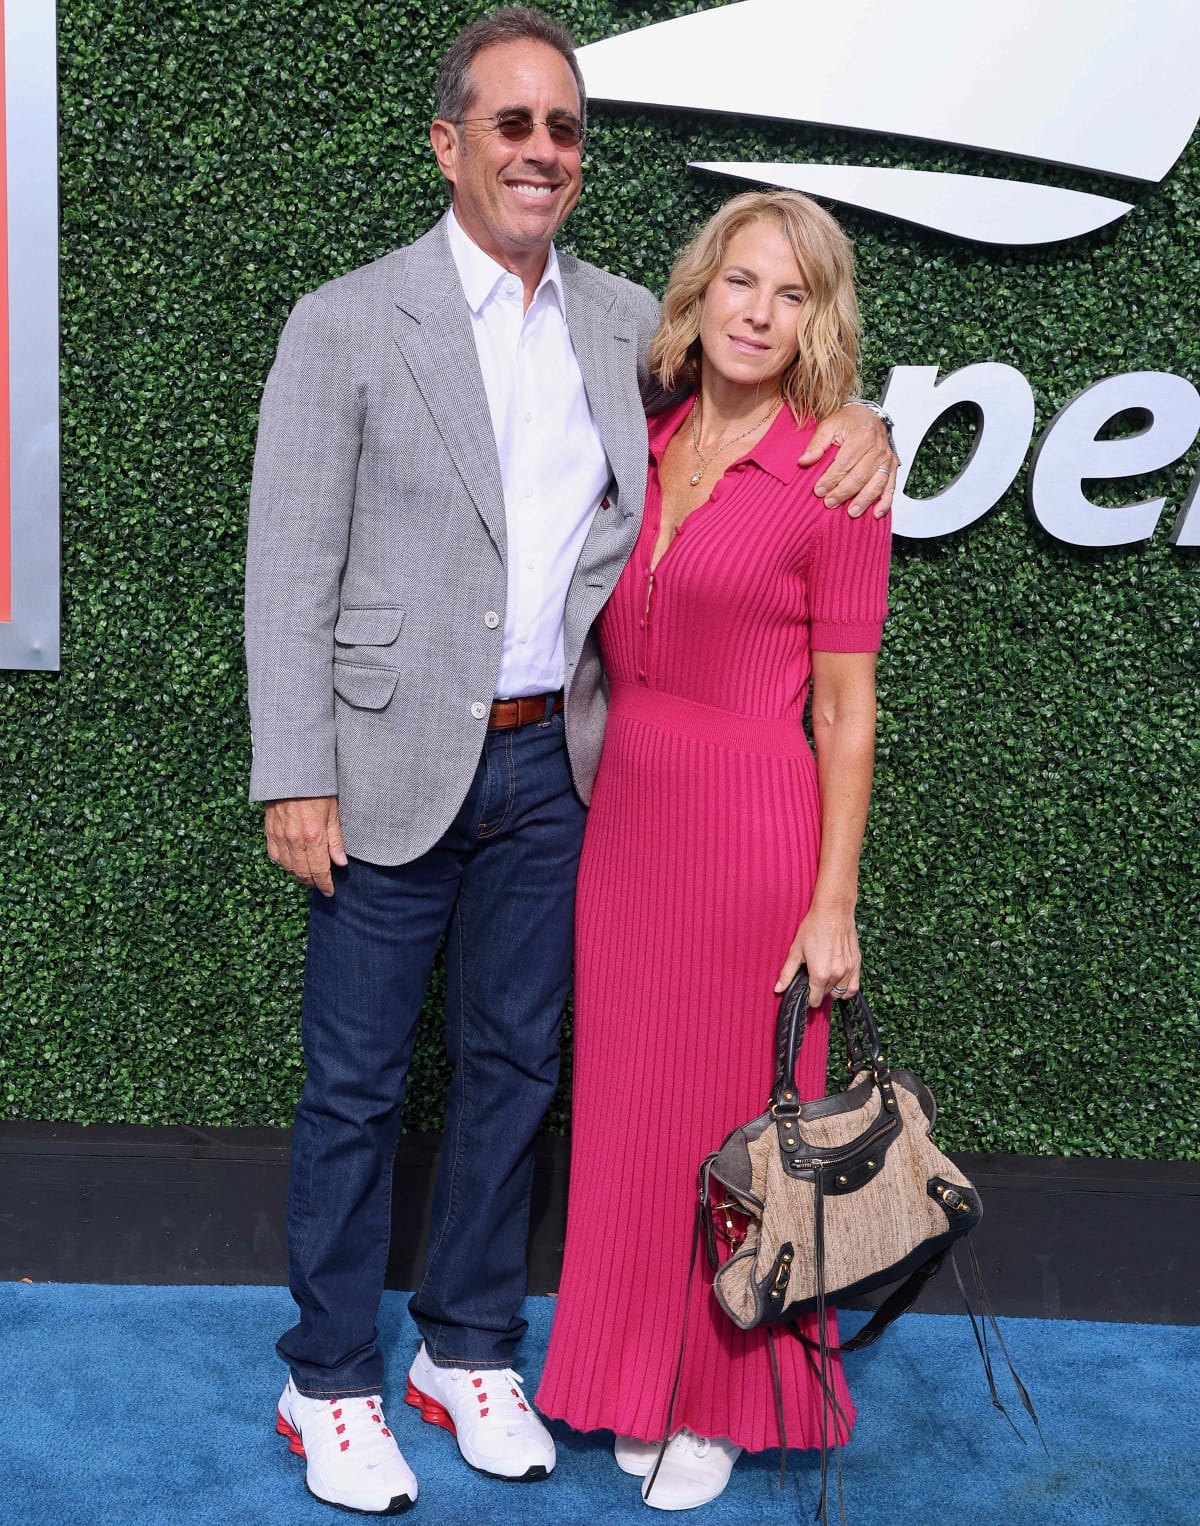 Jerry Seinfeld (pictured with wife Jessica Seinfeld) has an outstanding net worth of $950 million